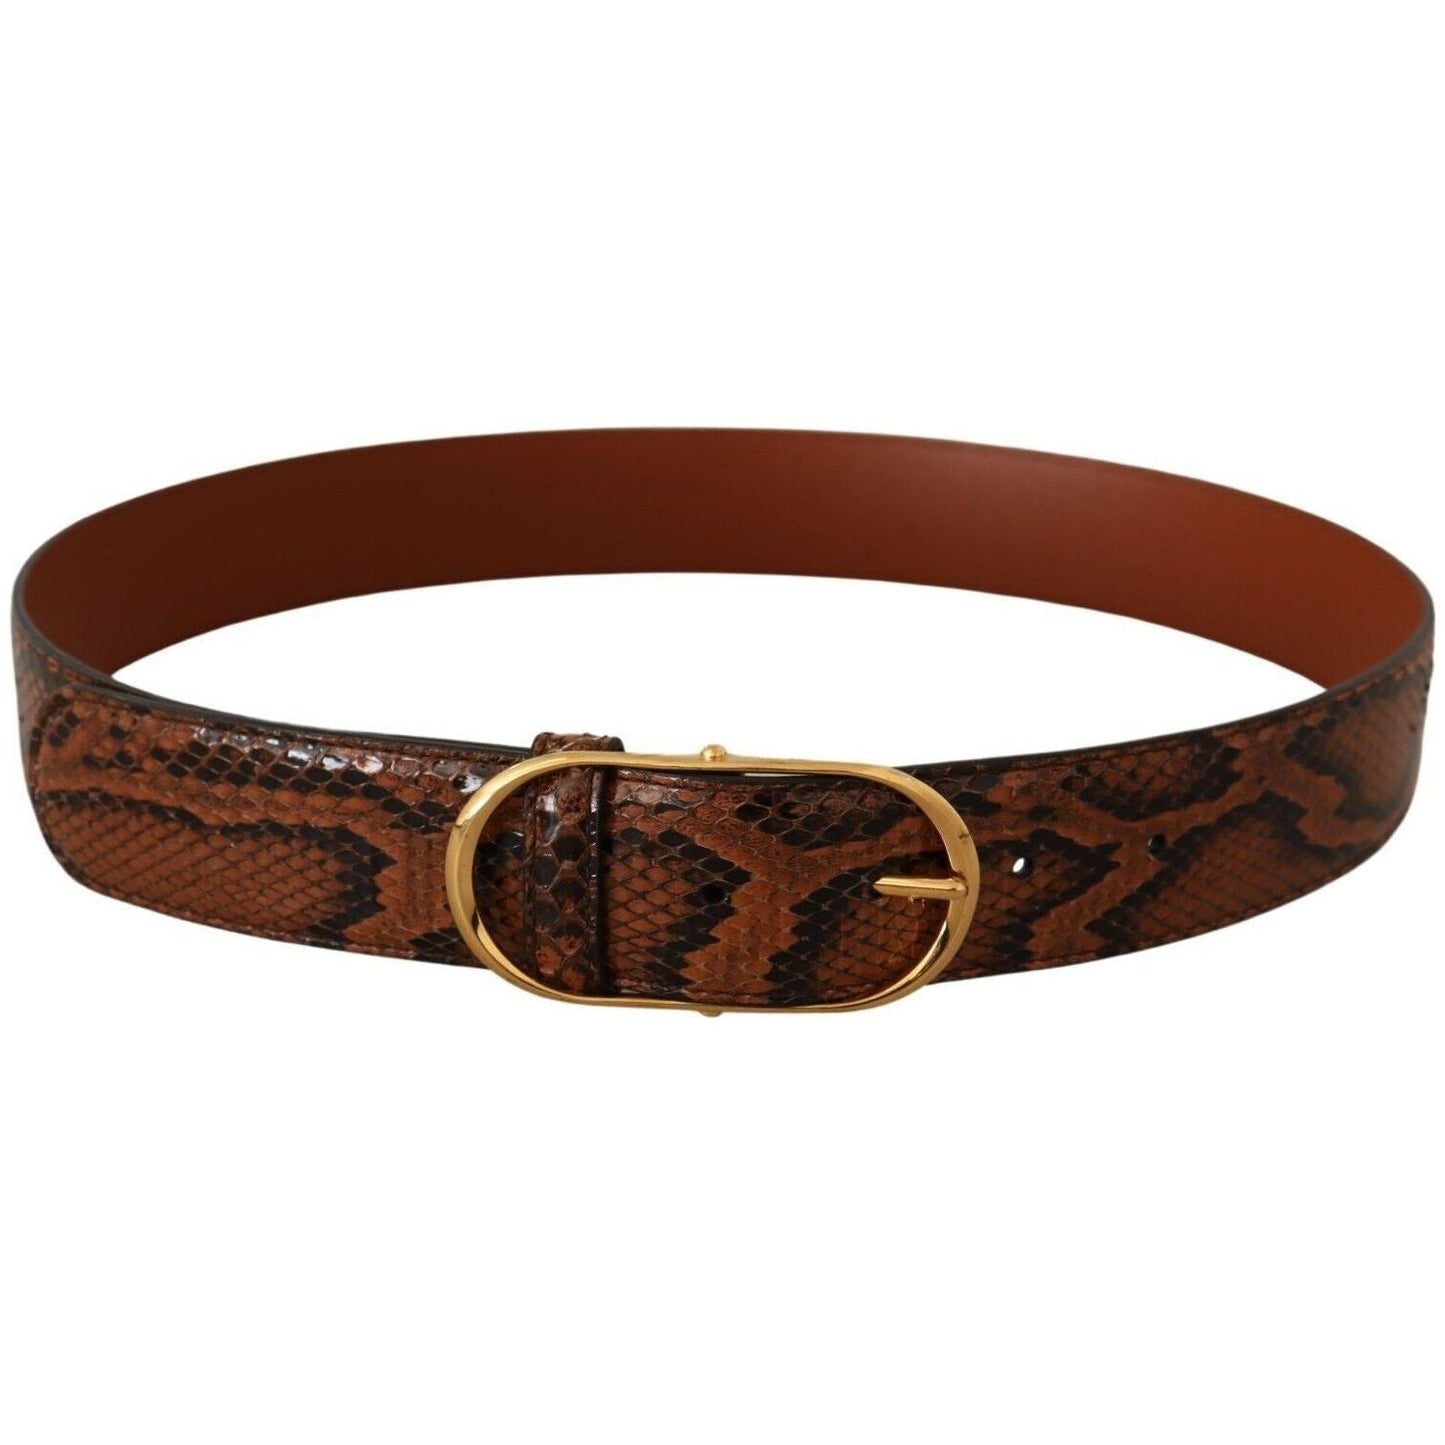 Dolce & Gabbana Elegant Leather Belt with Gold Buckle brown-exotic-leather-gold-oval-buckle-belt-7 s-l1600-290-4f2526cd-456.jpg